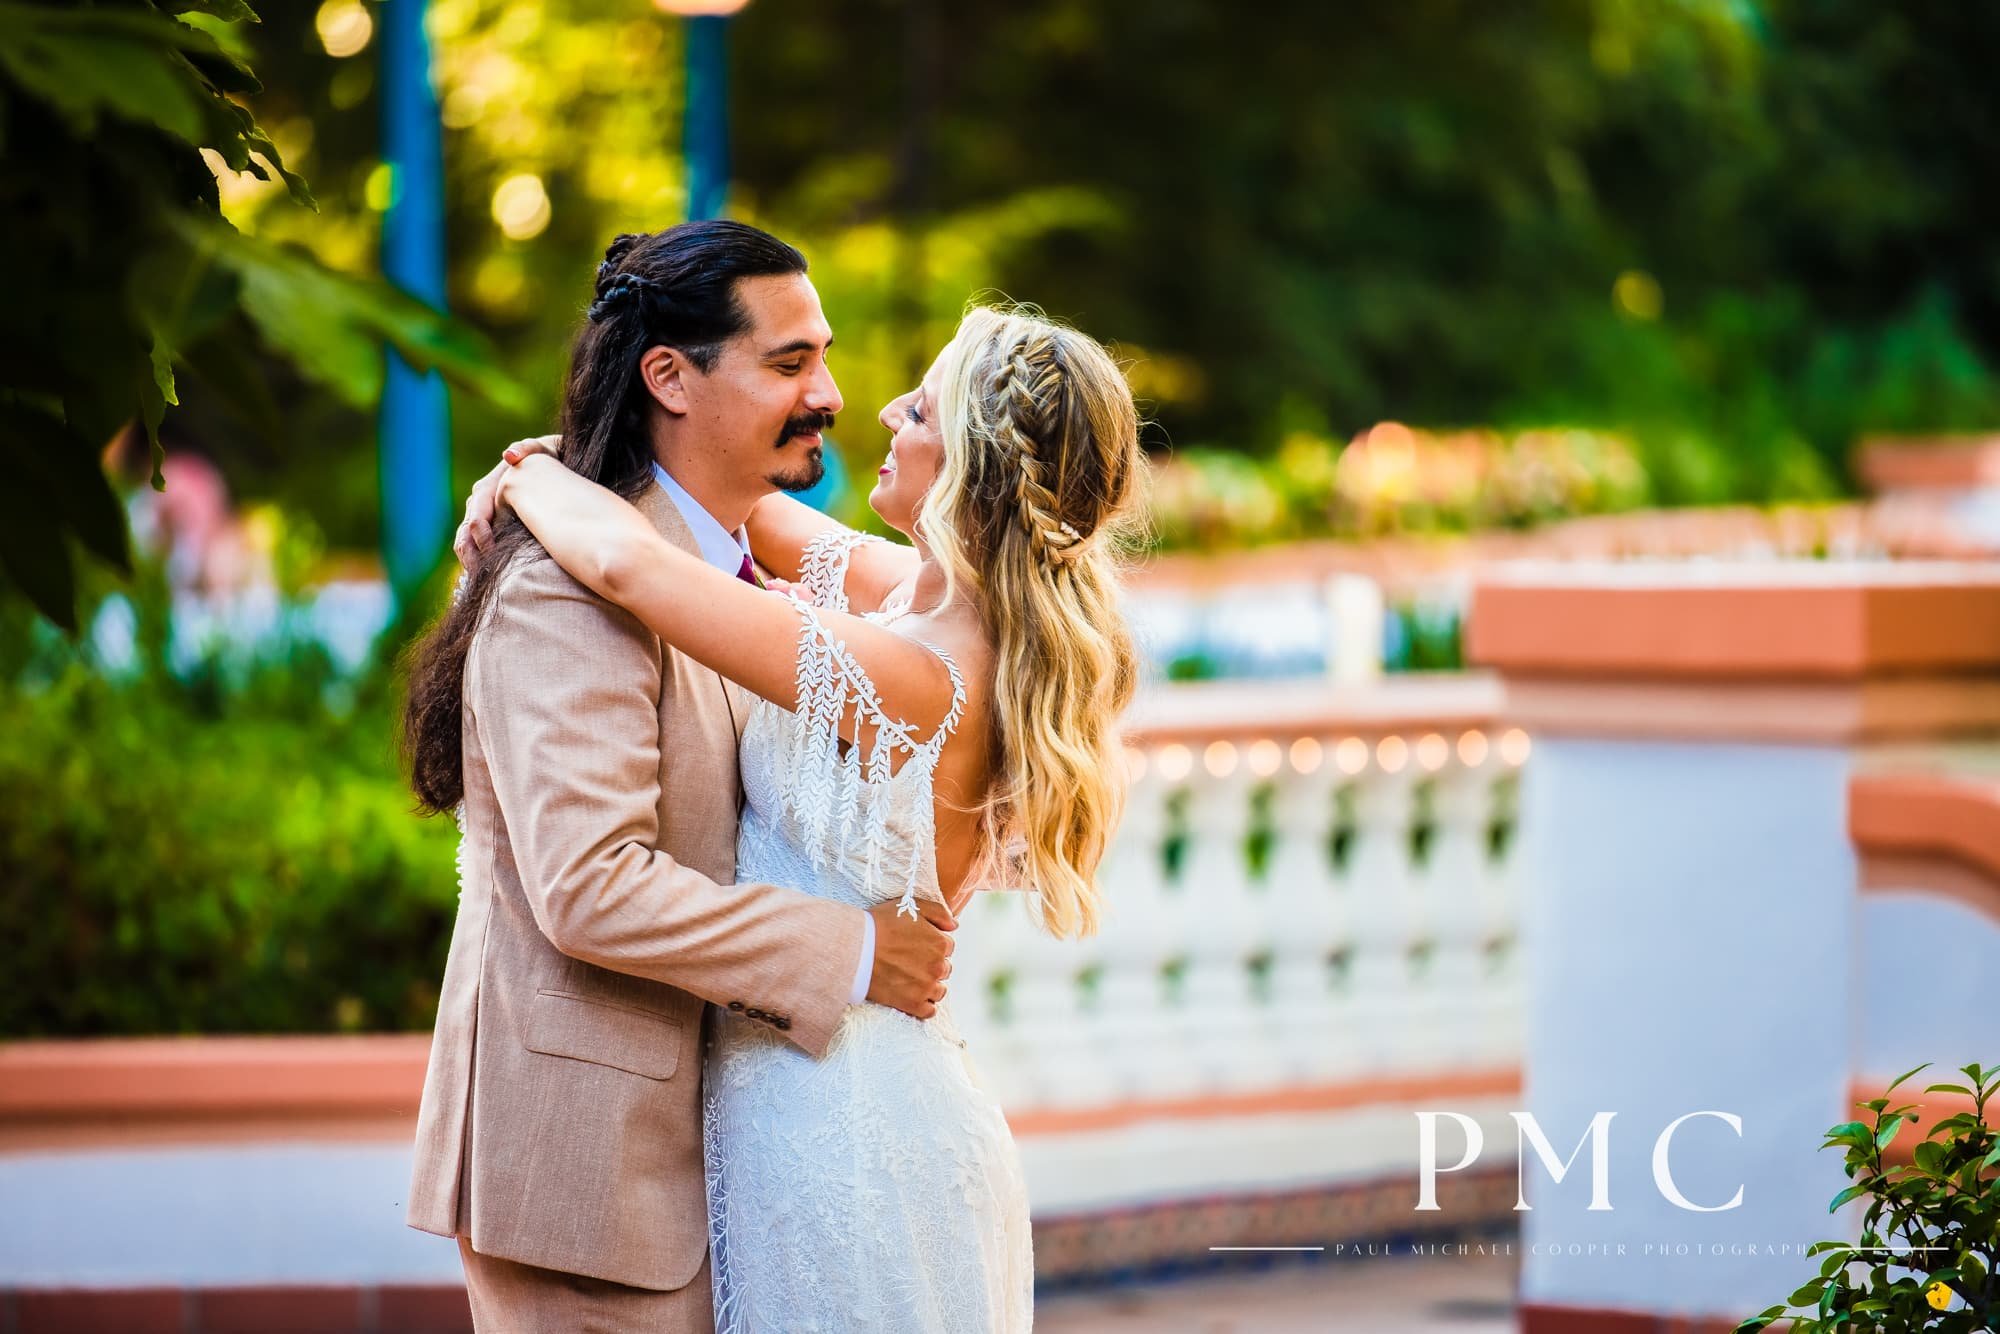 Lana + Zach | Vibrant Wedding Filled with Smiles and Music at a Spanish-Style Oasis | Orange County, California